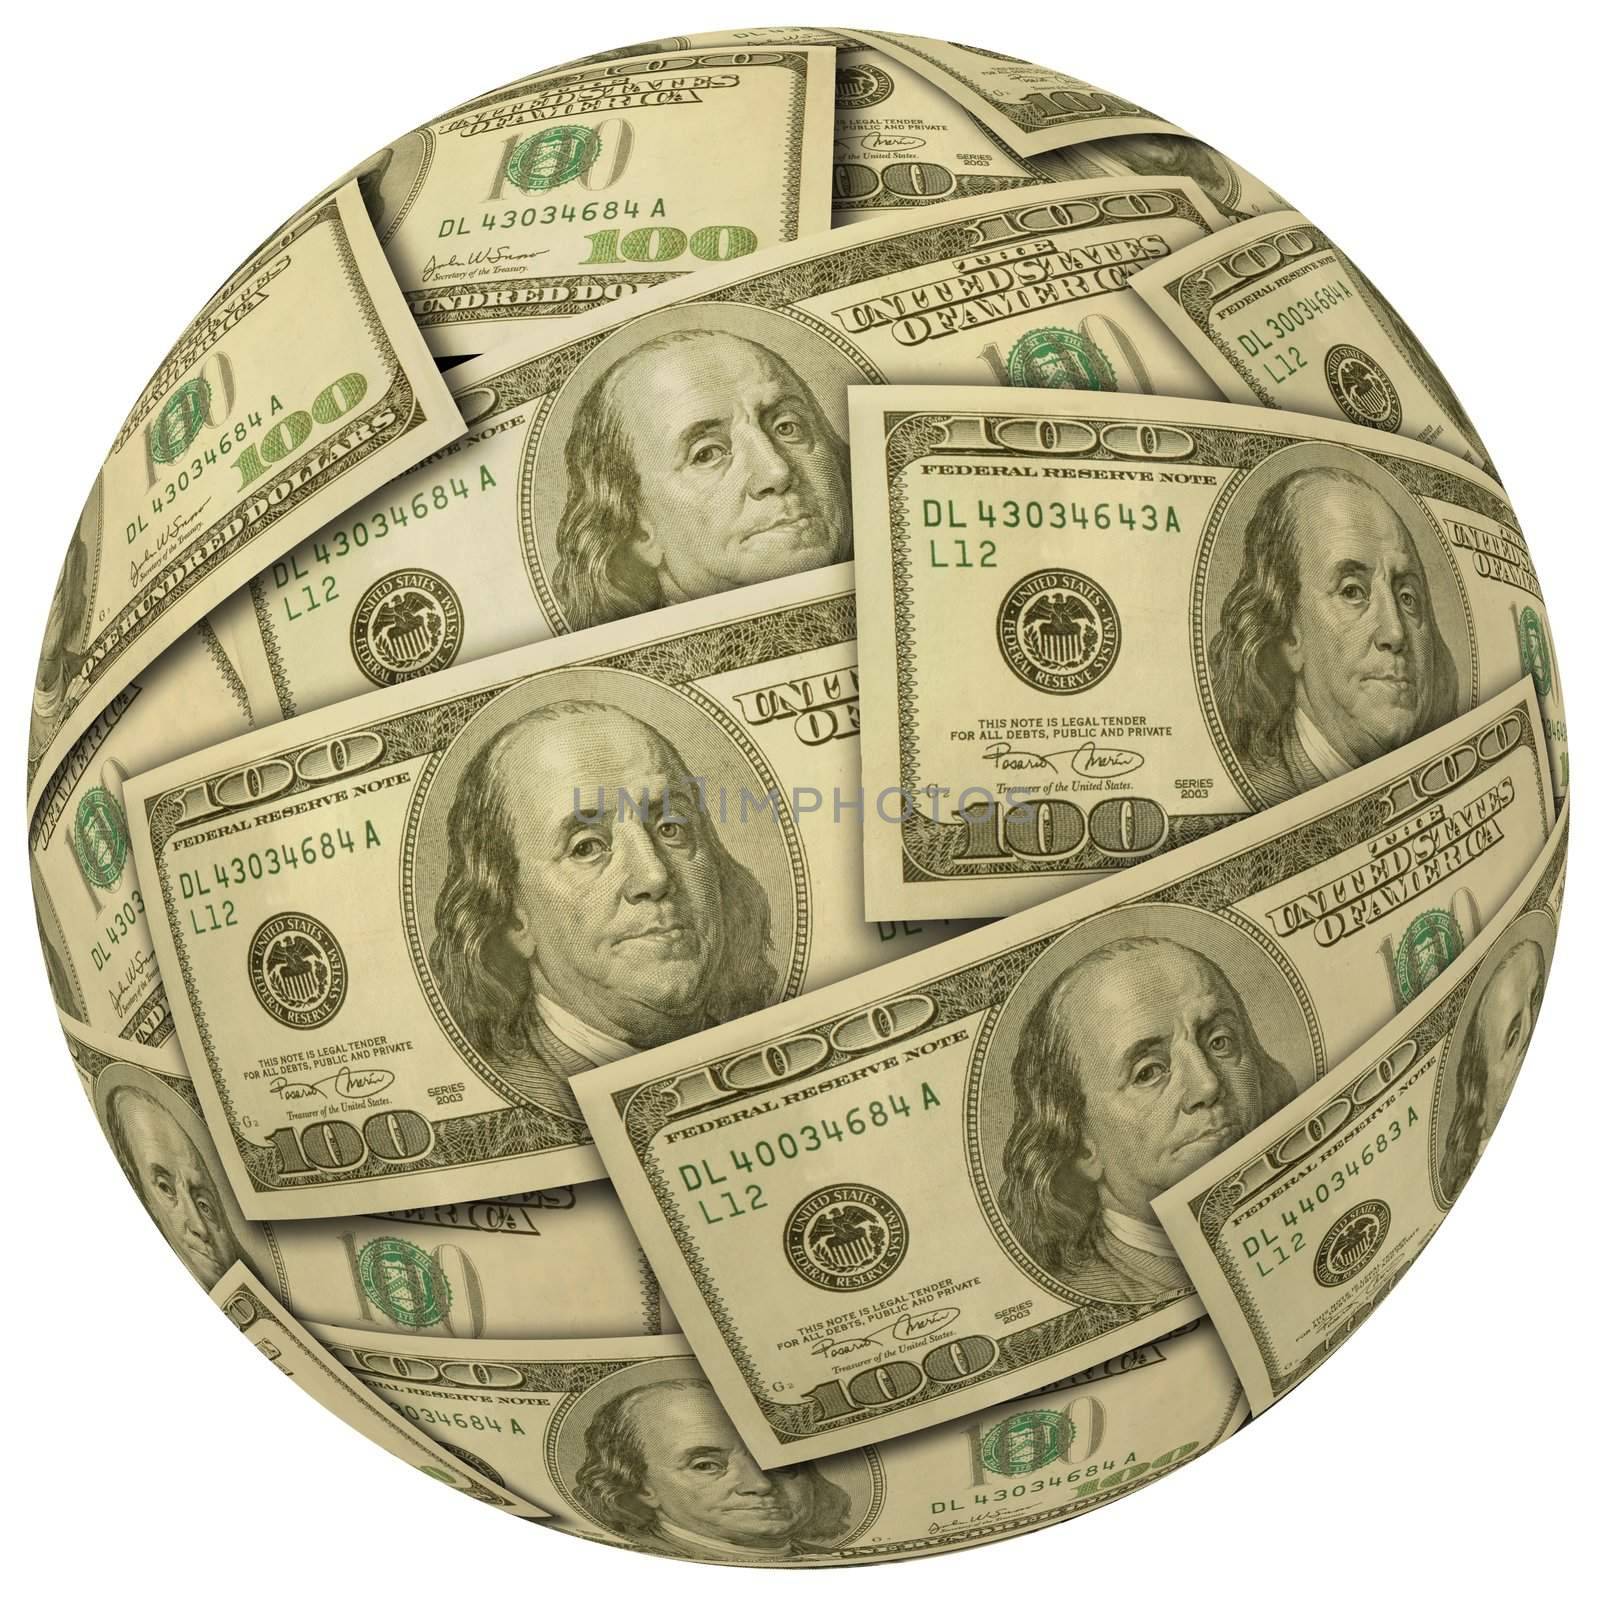 Cash Ball or sphere of $100 banknotes